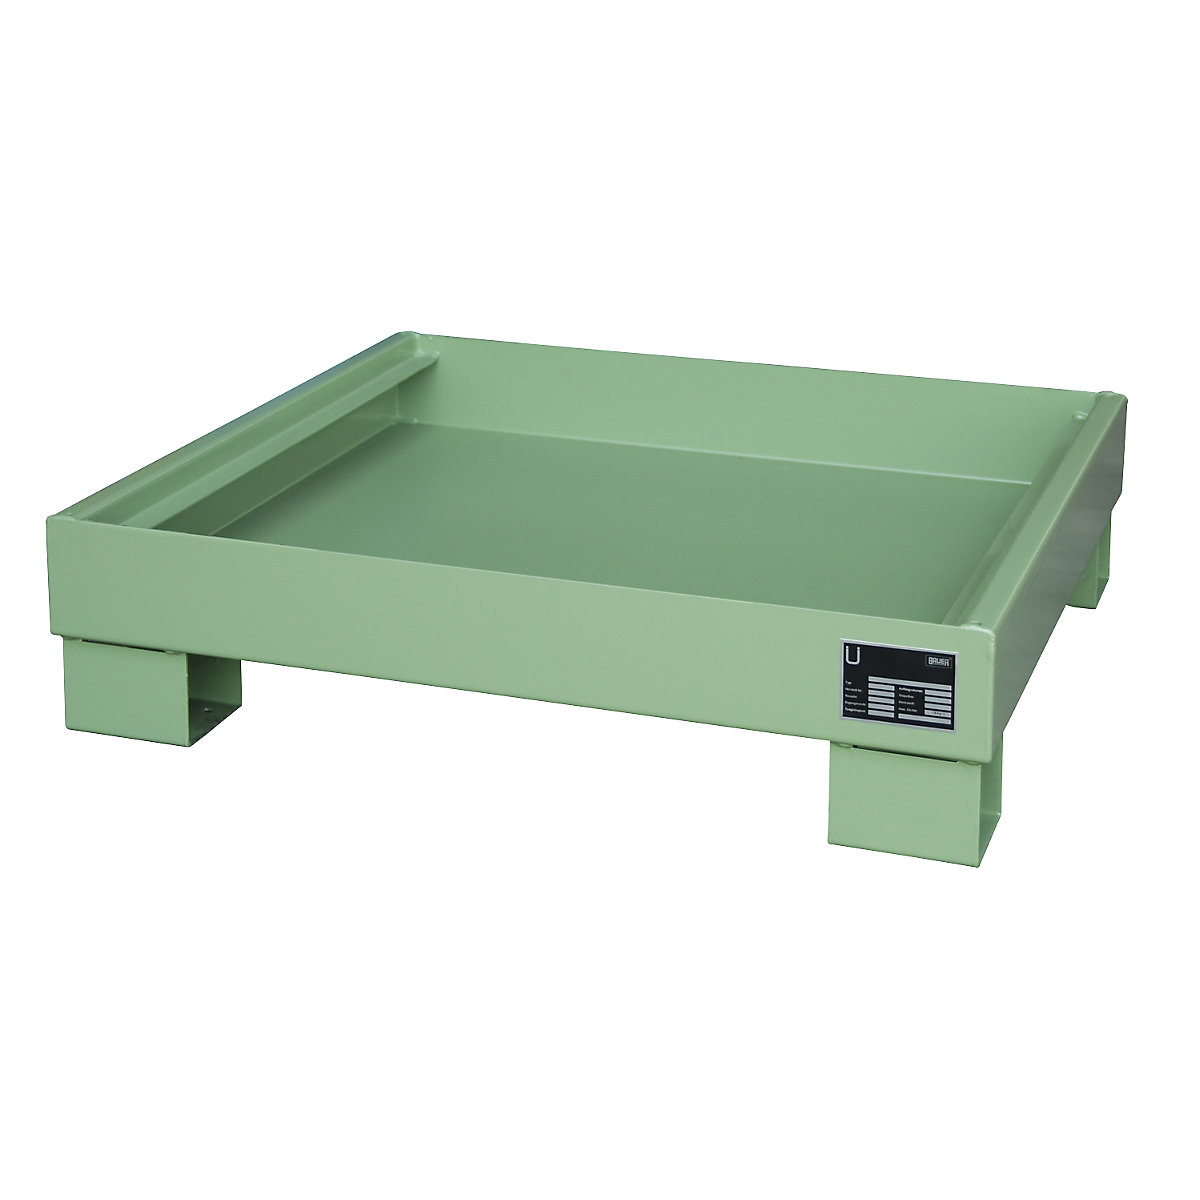 Steel sump tray for 60 l drum - eurokraft pro